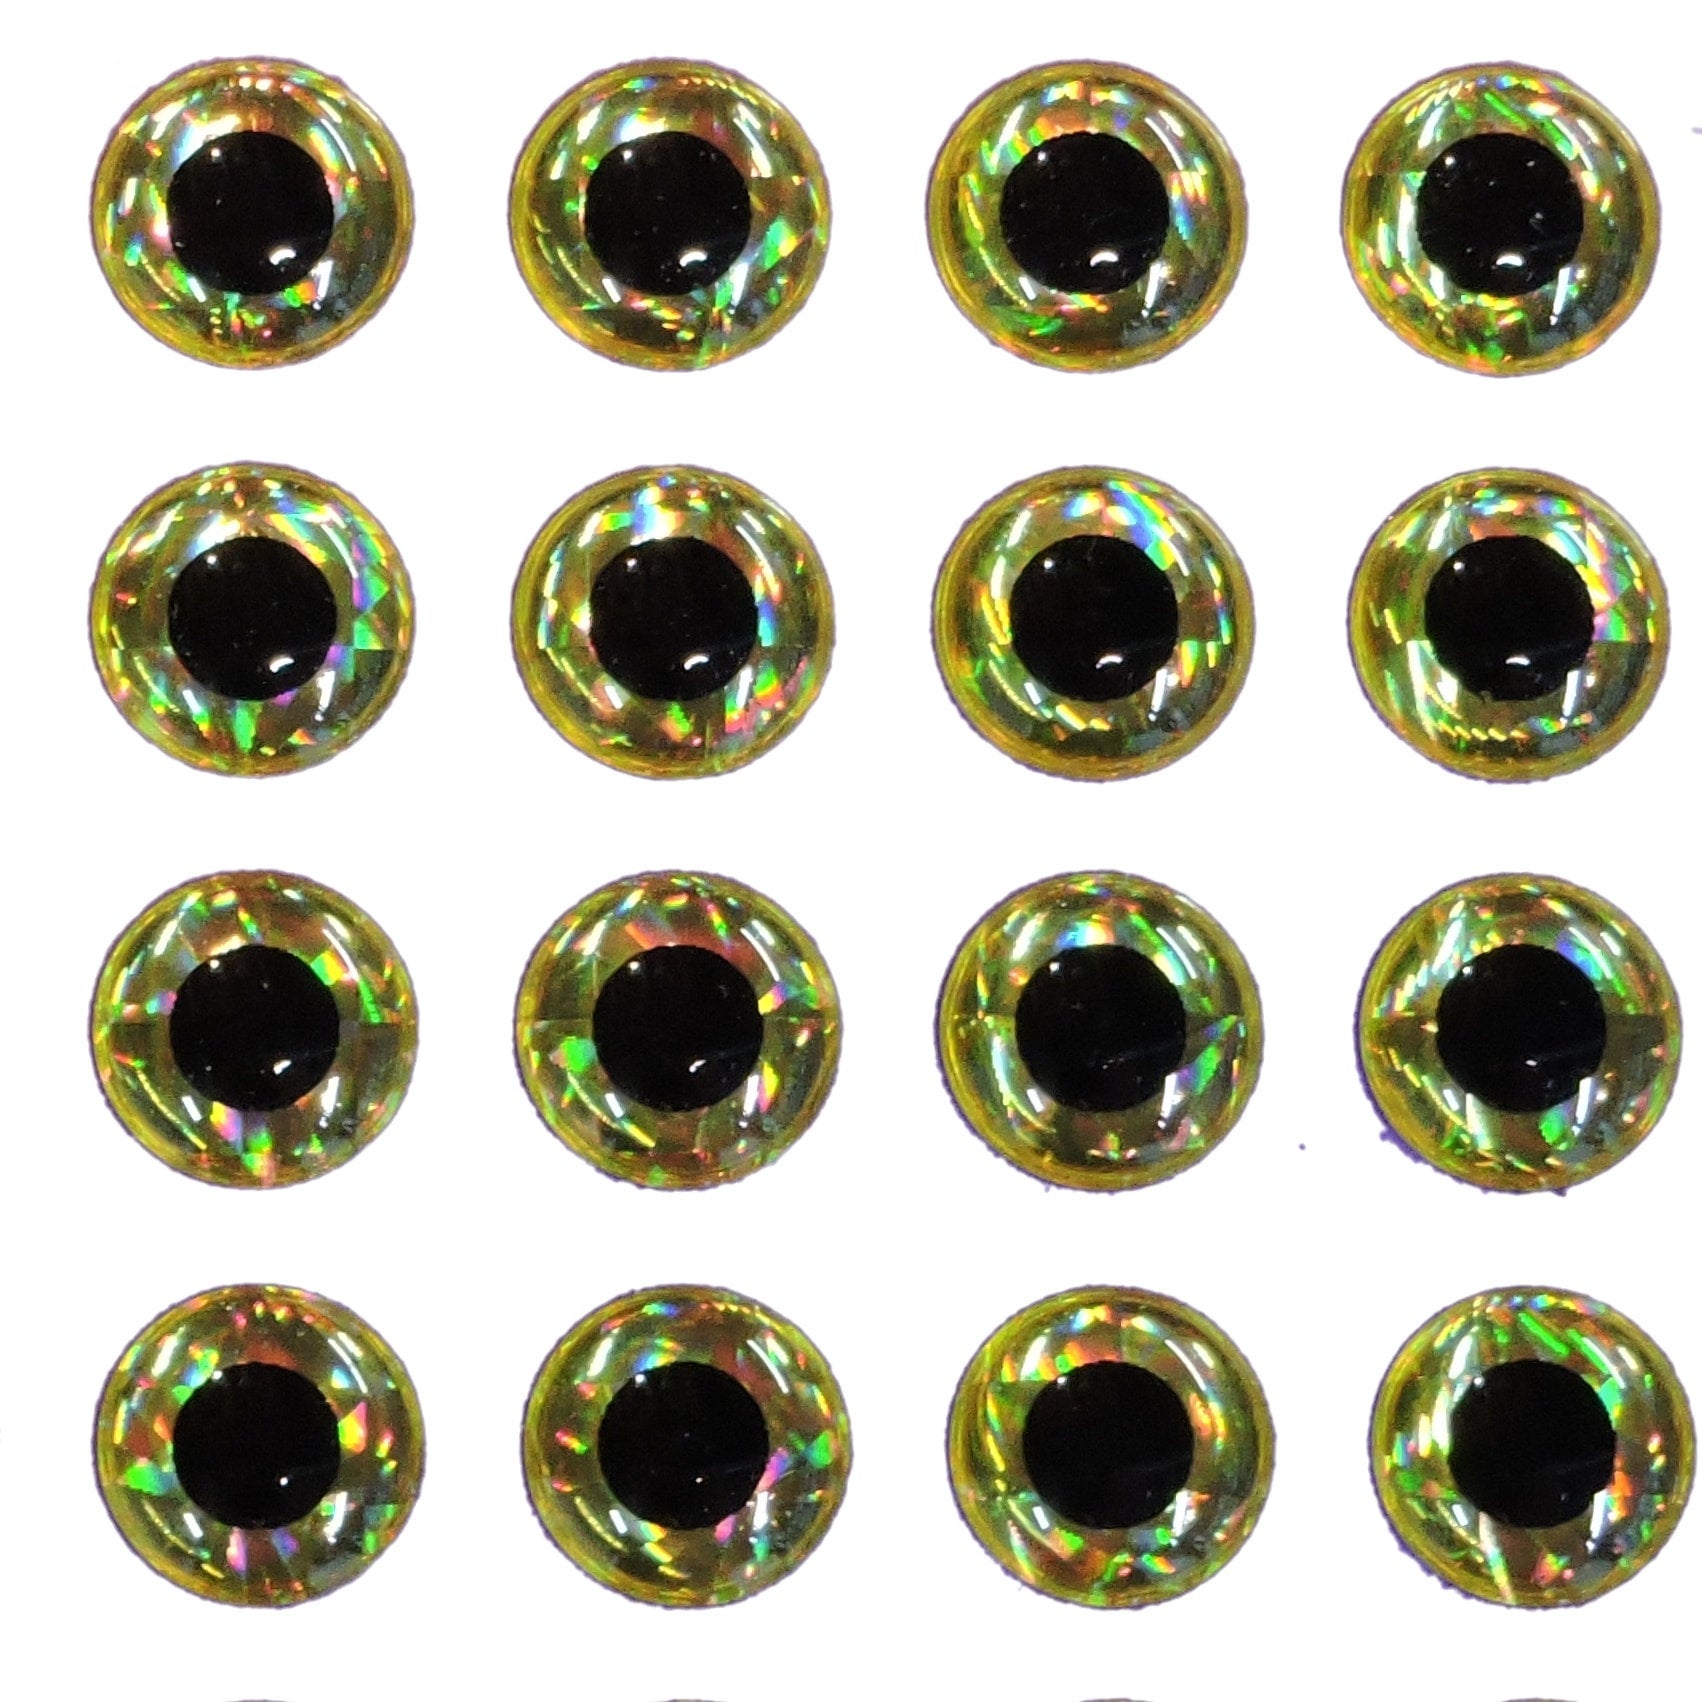 6mm (1/4) - 3D Holographic Eyes for Fly Tying and Lure Making